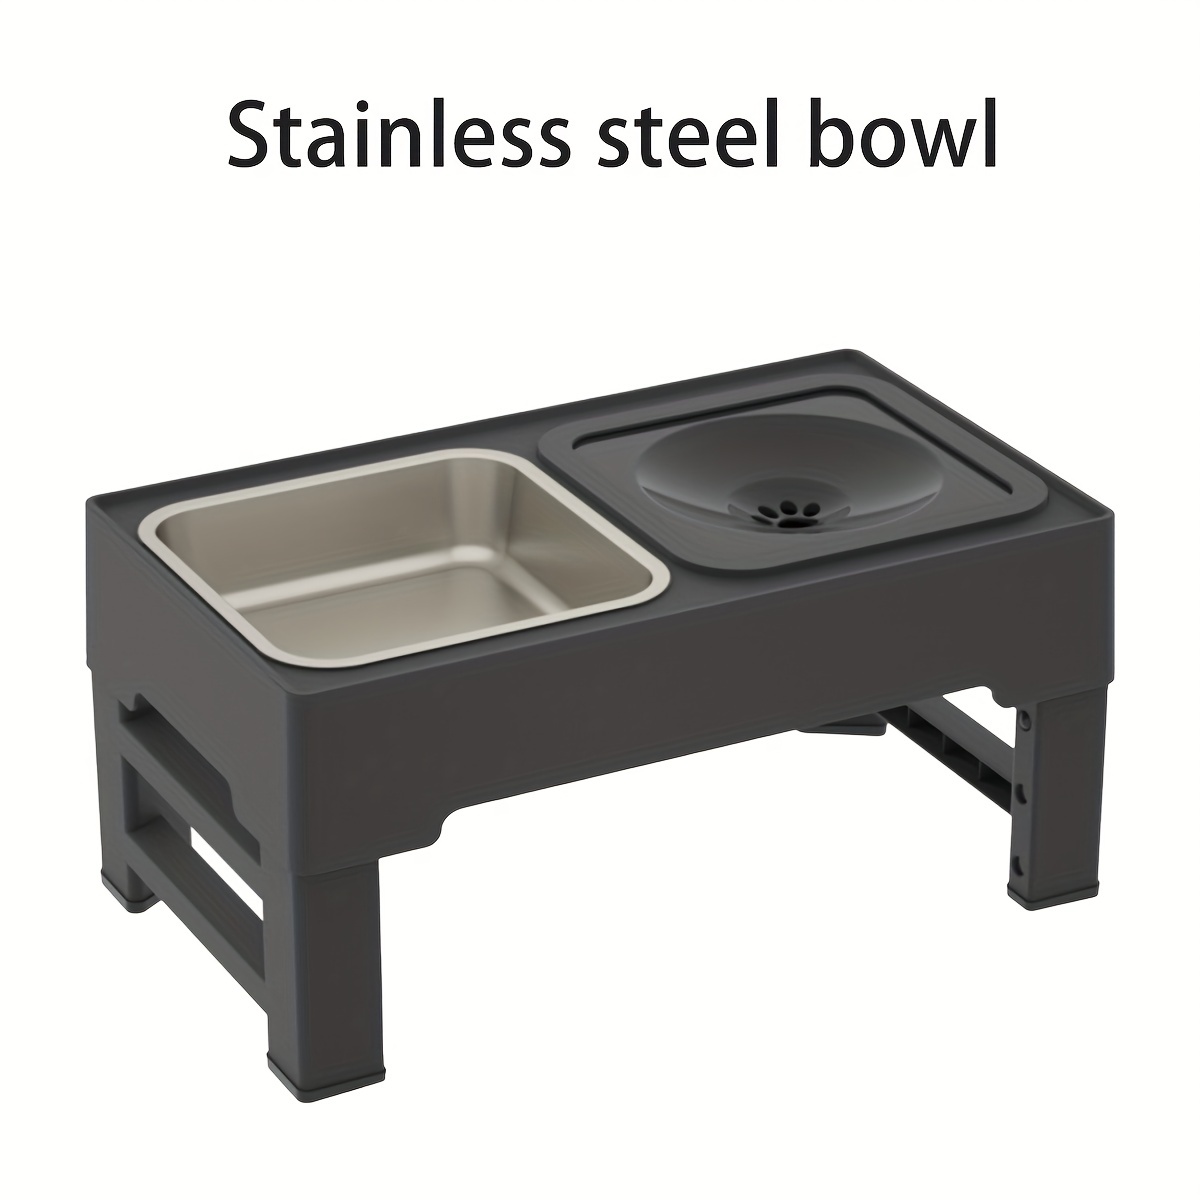 Elevated Dog Bowls for Large Dogs, Raised Dog Bowl Stand with No Spill Dog Water Bowl & Stainless Steel Dog Food Bowl, 4 Heights Adjustable for Small